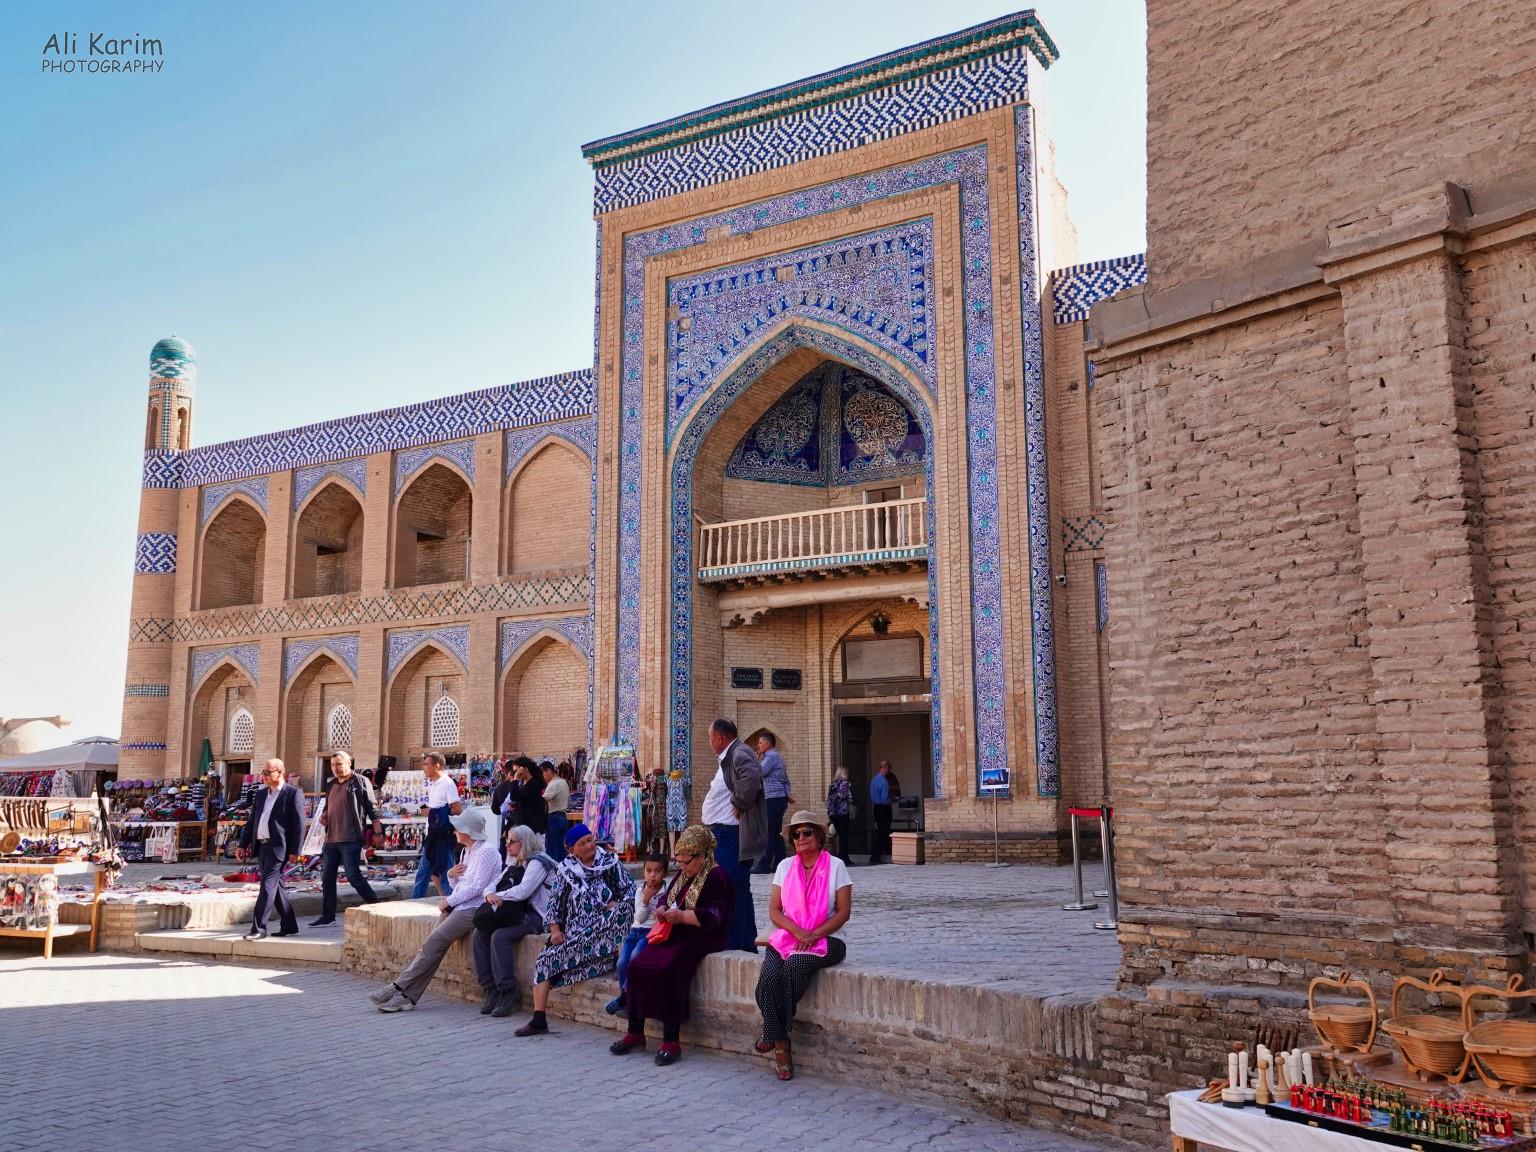 Khiva, Oct 2019, Outside the Museum of Applied Art, in a well restored historic building